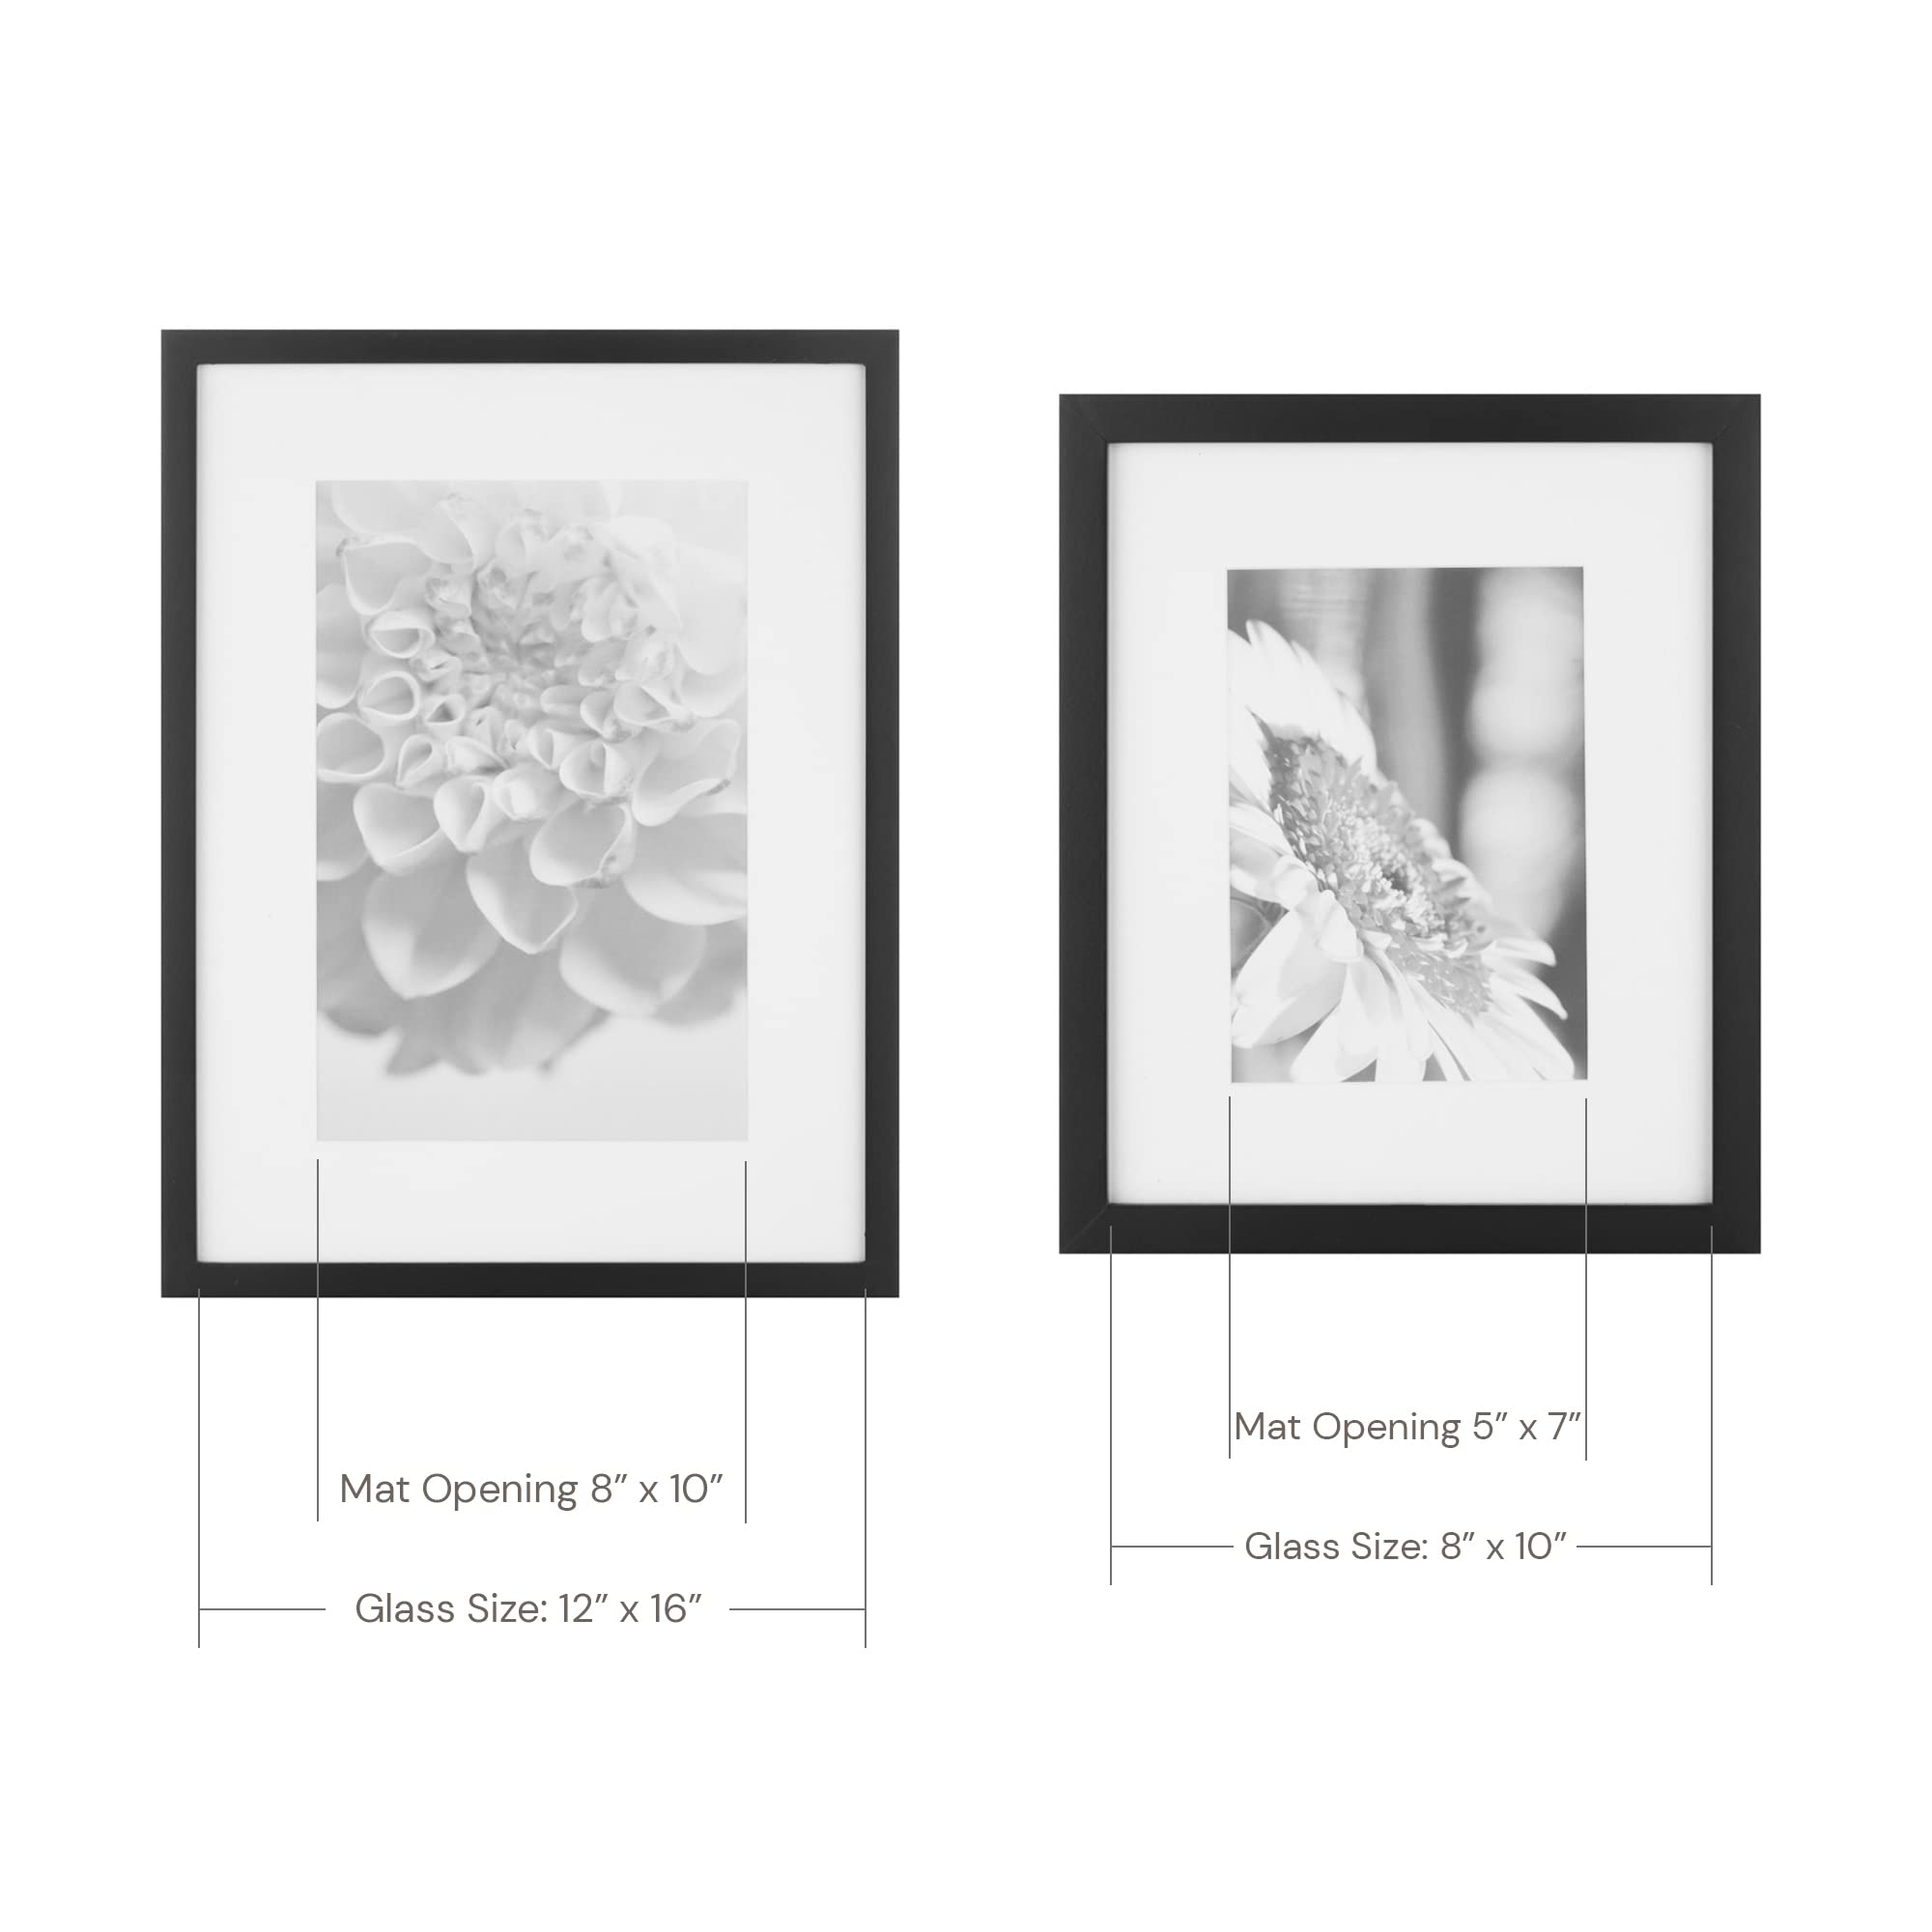 Gallery Perfect 7 Piece Black Gallery Wall Kit Picture Frame Set with Decorative Art Prints & Hanging Template, Multi-Size